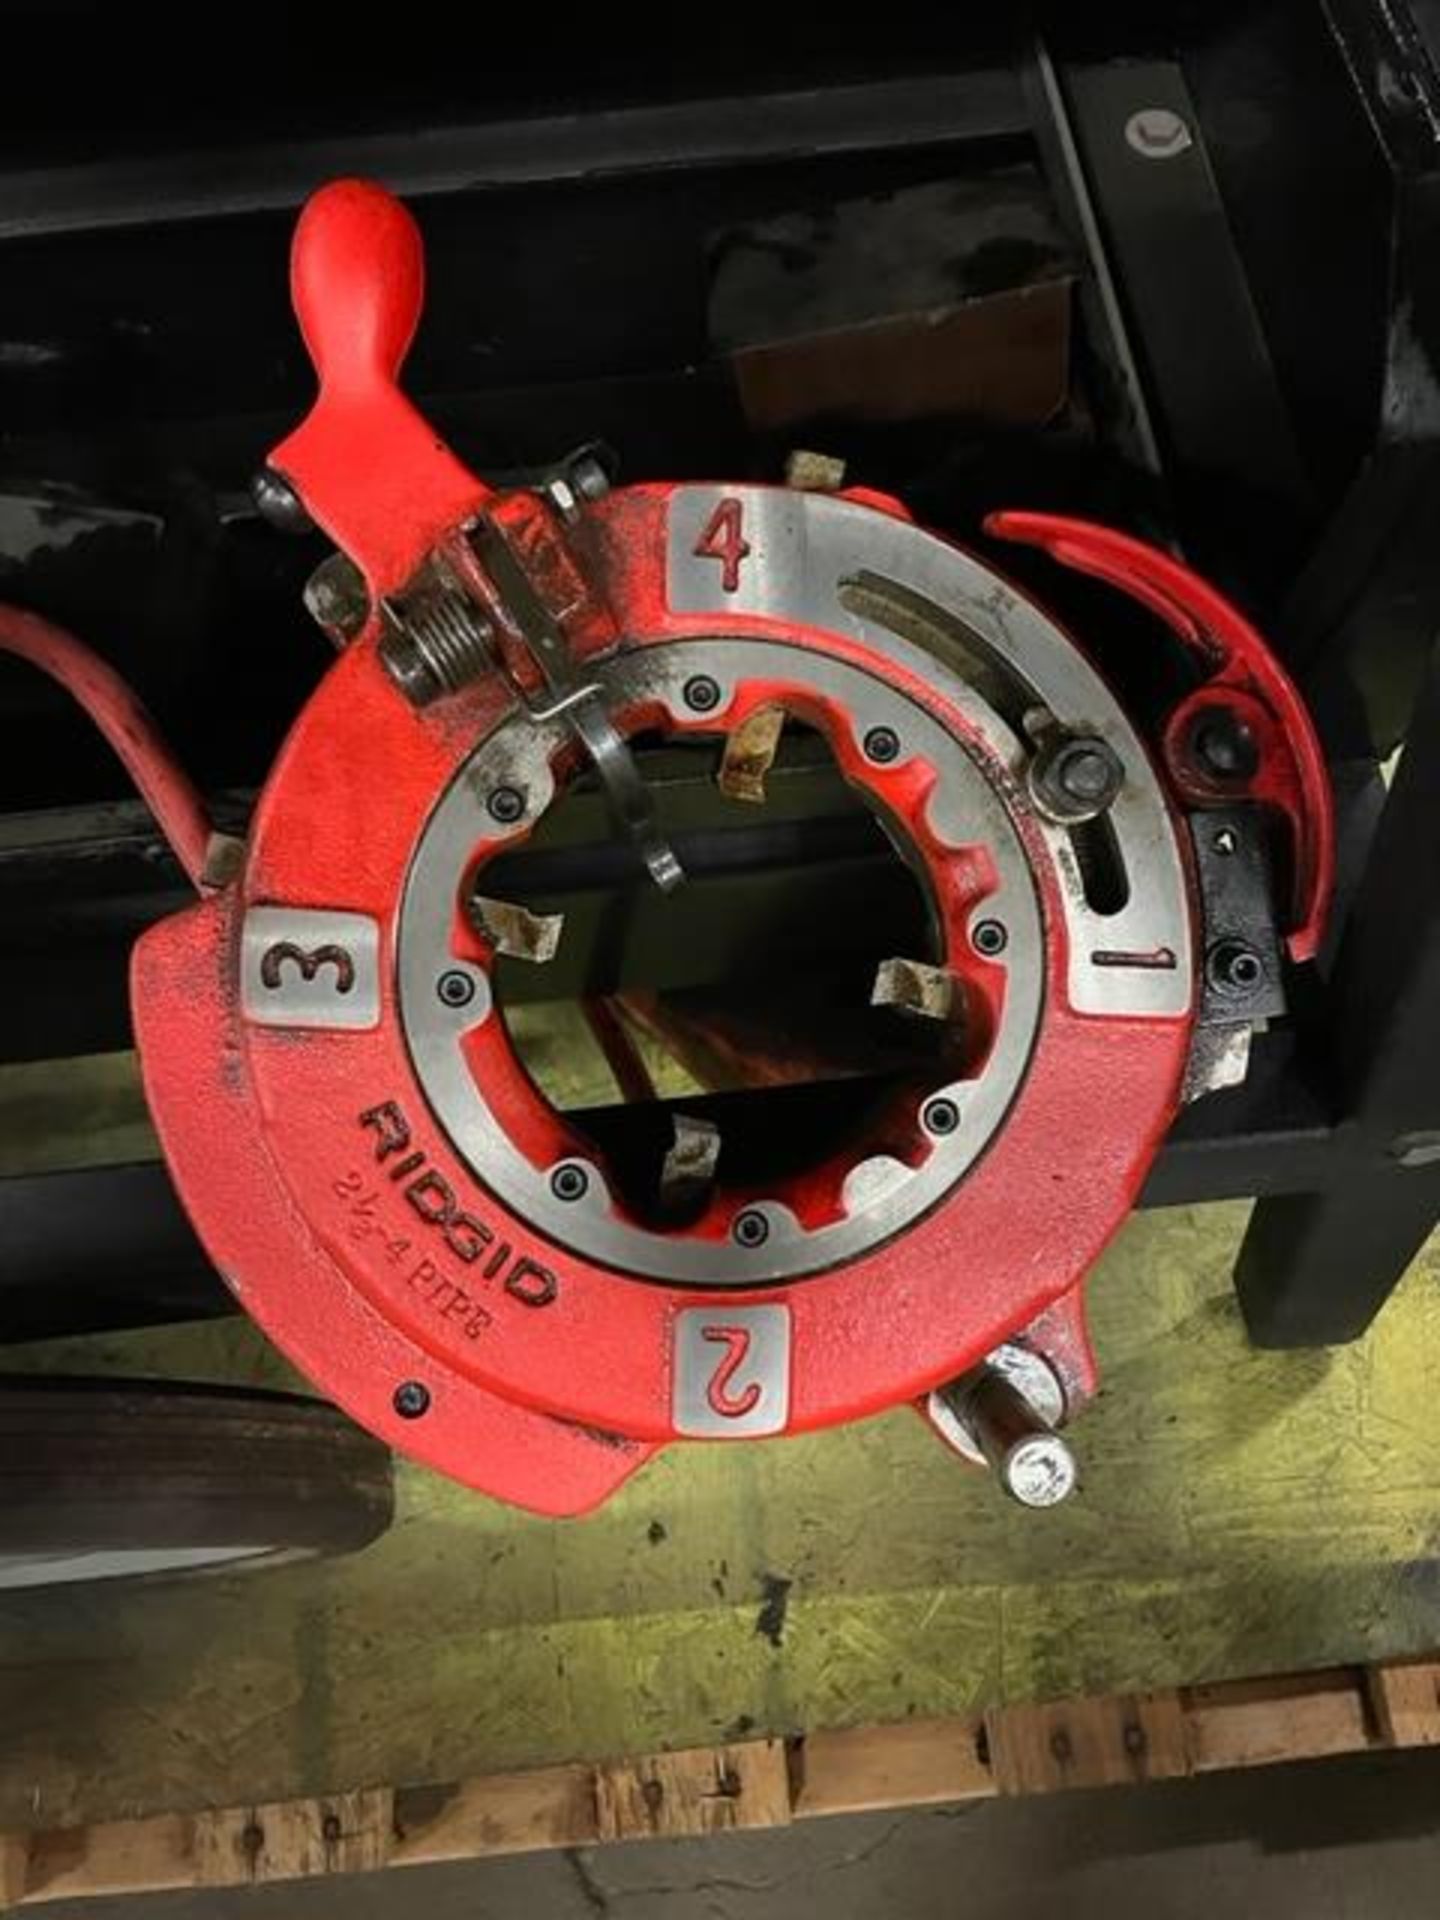 MINT Ridgid 1224 Pipe Threader with 1/8" to 4" capacity with dies - complete like new with cutter, - Image 3 of 3